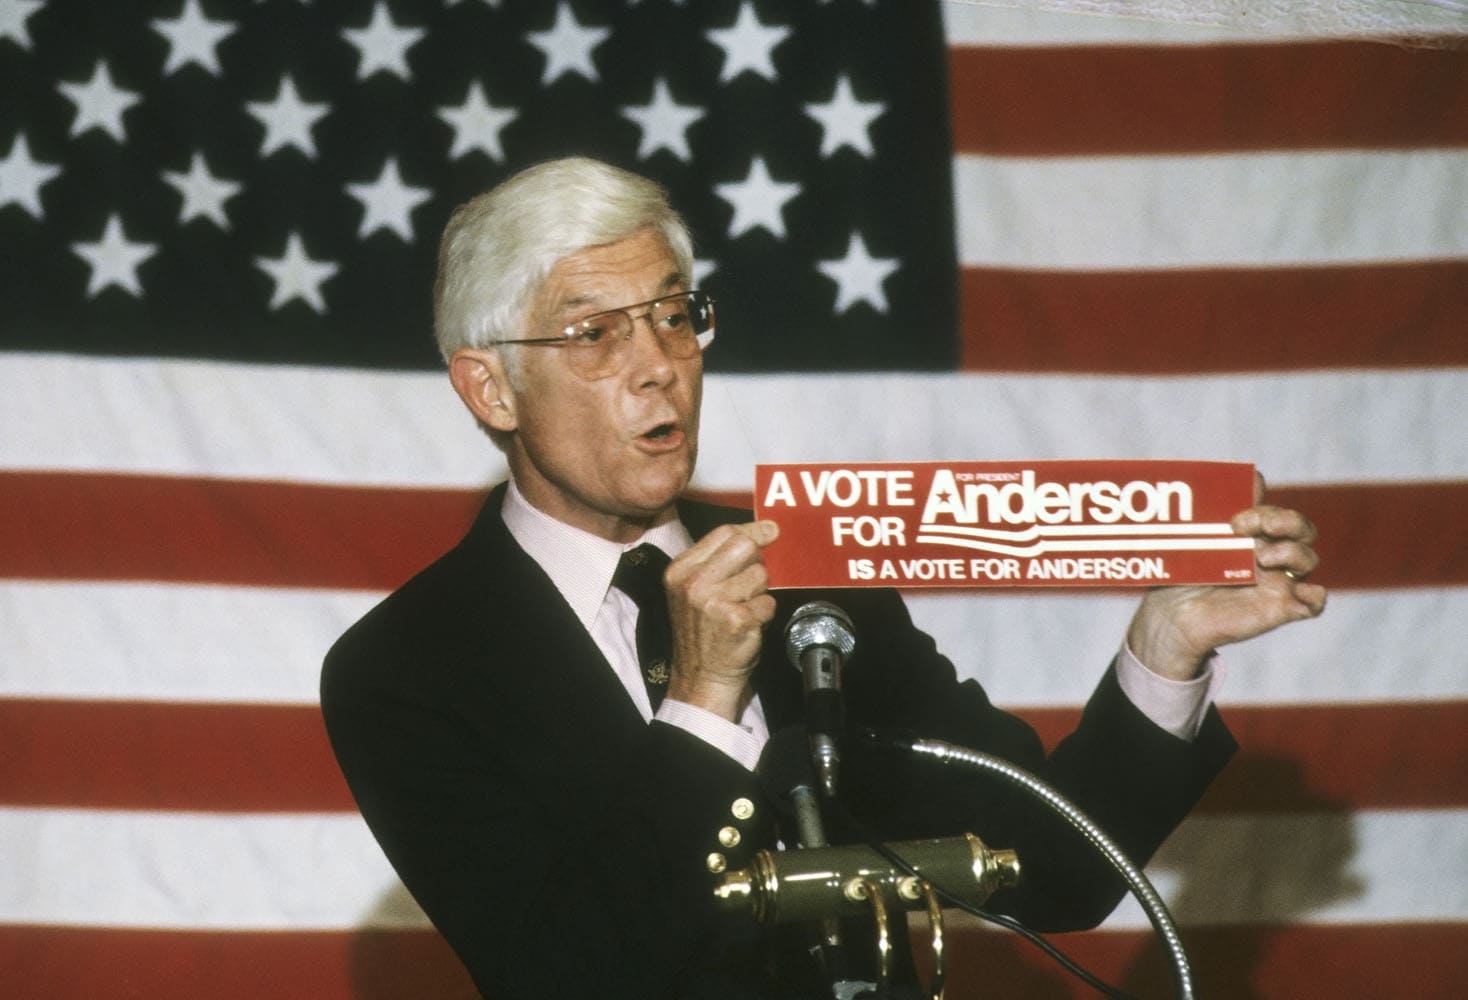 Independent Presidential candidate John Anderson on the campaign trail, Miami, Florida, October 1980. Anderson won about seven percent of the votes in an election where Gov. Ronald Reagan beat President Jimmy Carter.